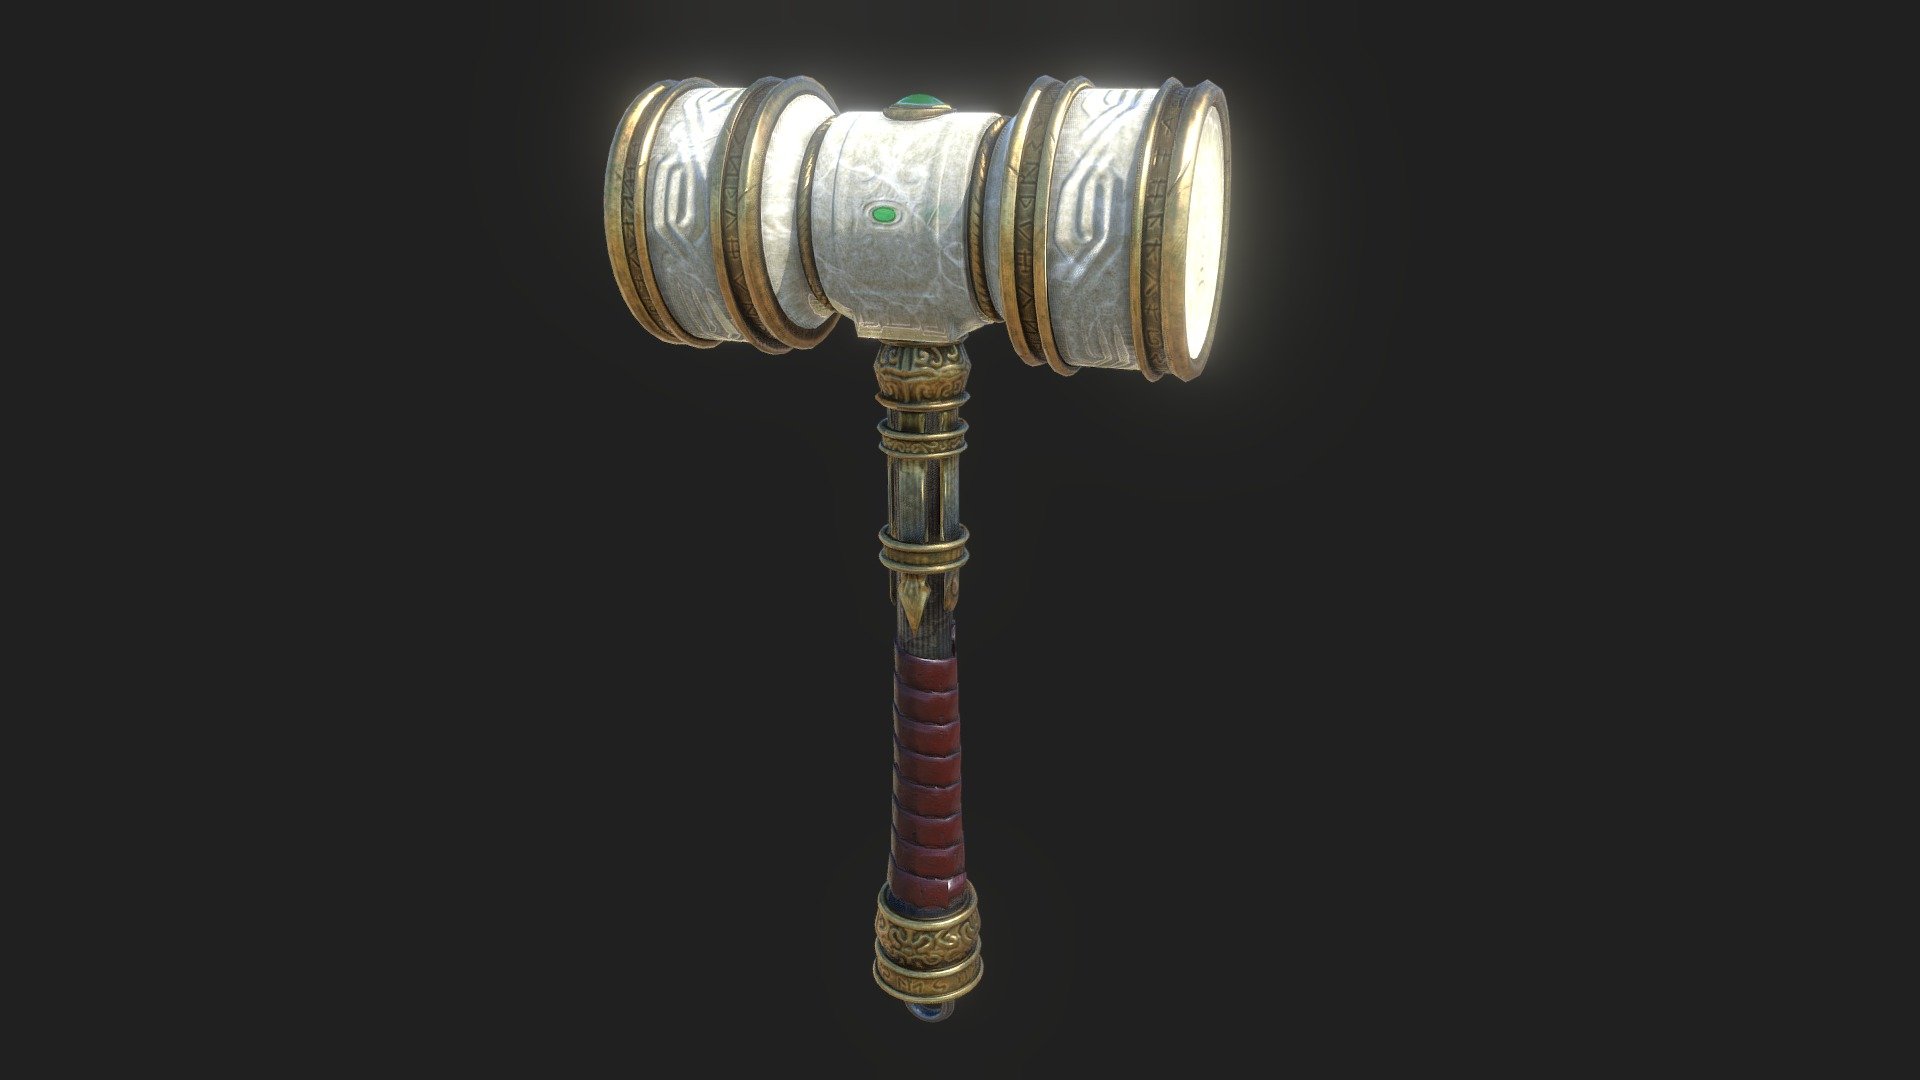 Here is a hammer that i modeled.Since i dont have much time to perfect it wanted to upload as it is. Enjoy 
Please leave a feedback :) - Dwarven Hammer - 3D model by Oguz Guzel (@OguzGuzel) 3d model